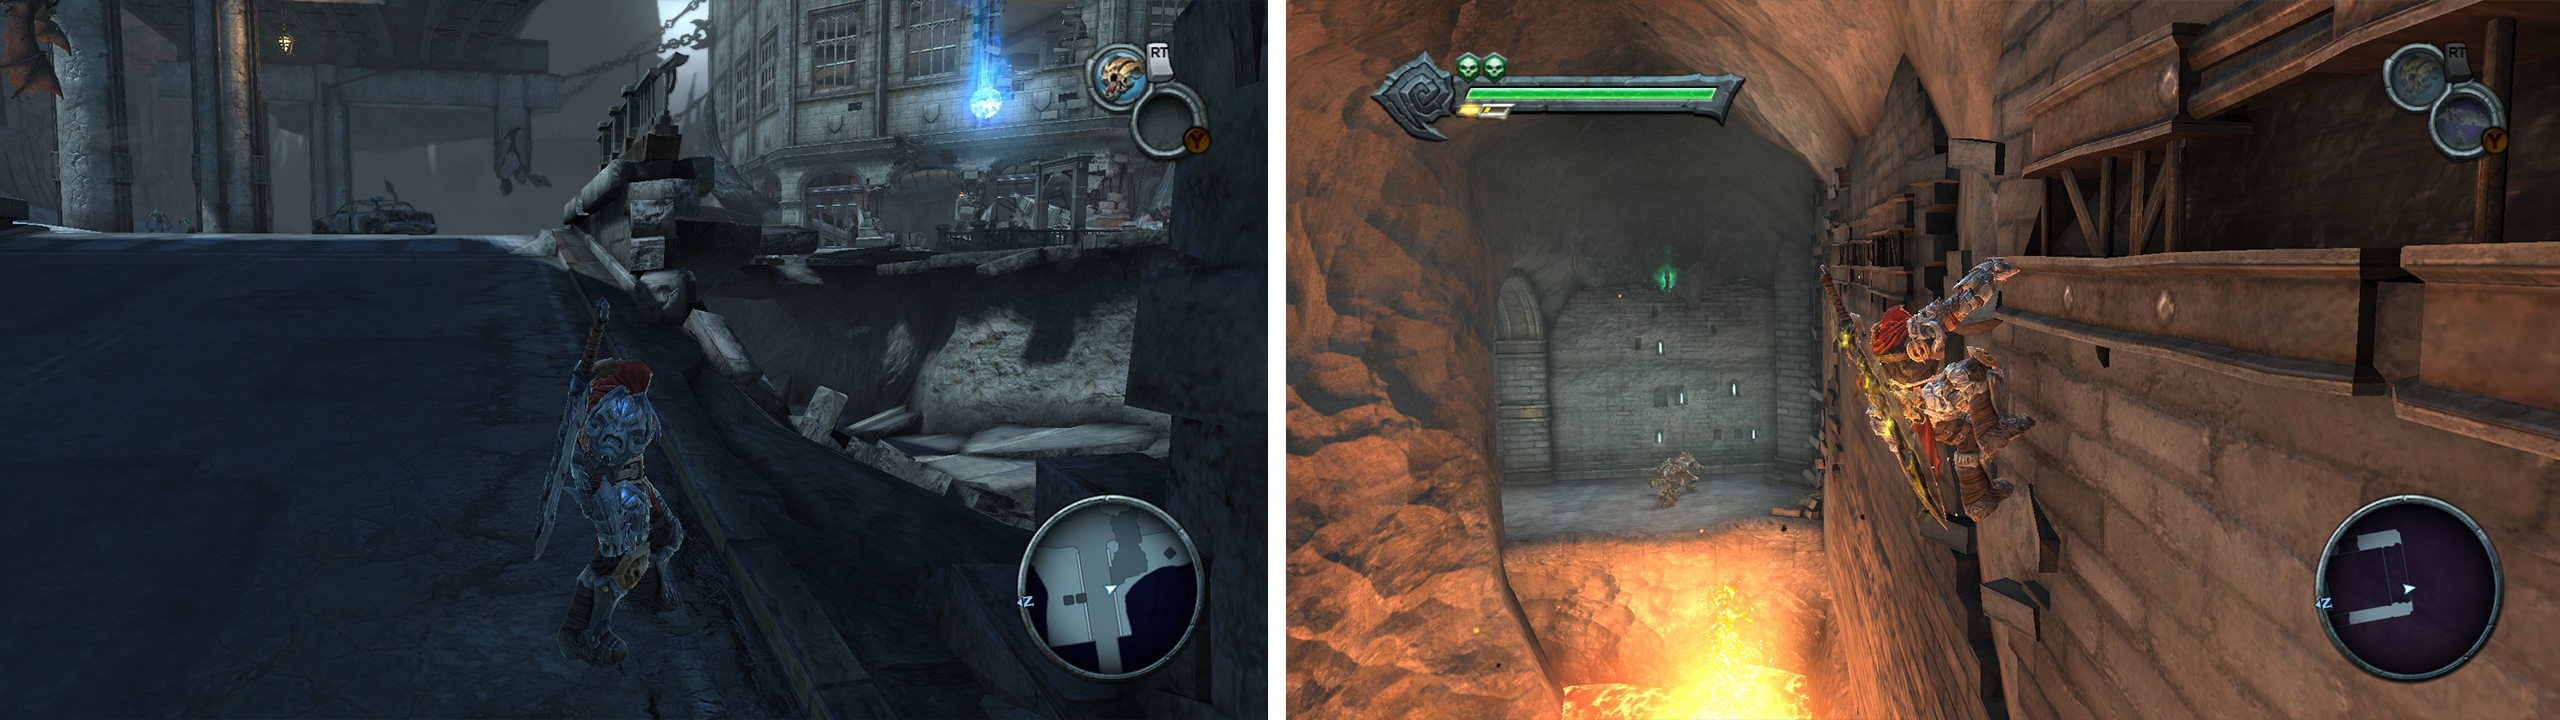 Upon entering the Broken Stair go through the destroyed wall (left) to find an Artefact. In the twilight Cathedral, after crossing this gap back jump from the wall to grab the Artefact (right).